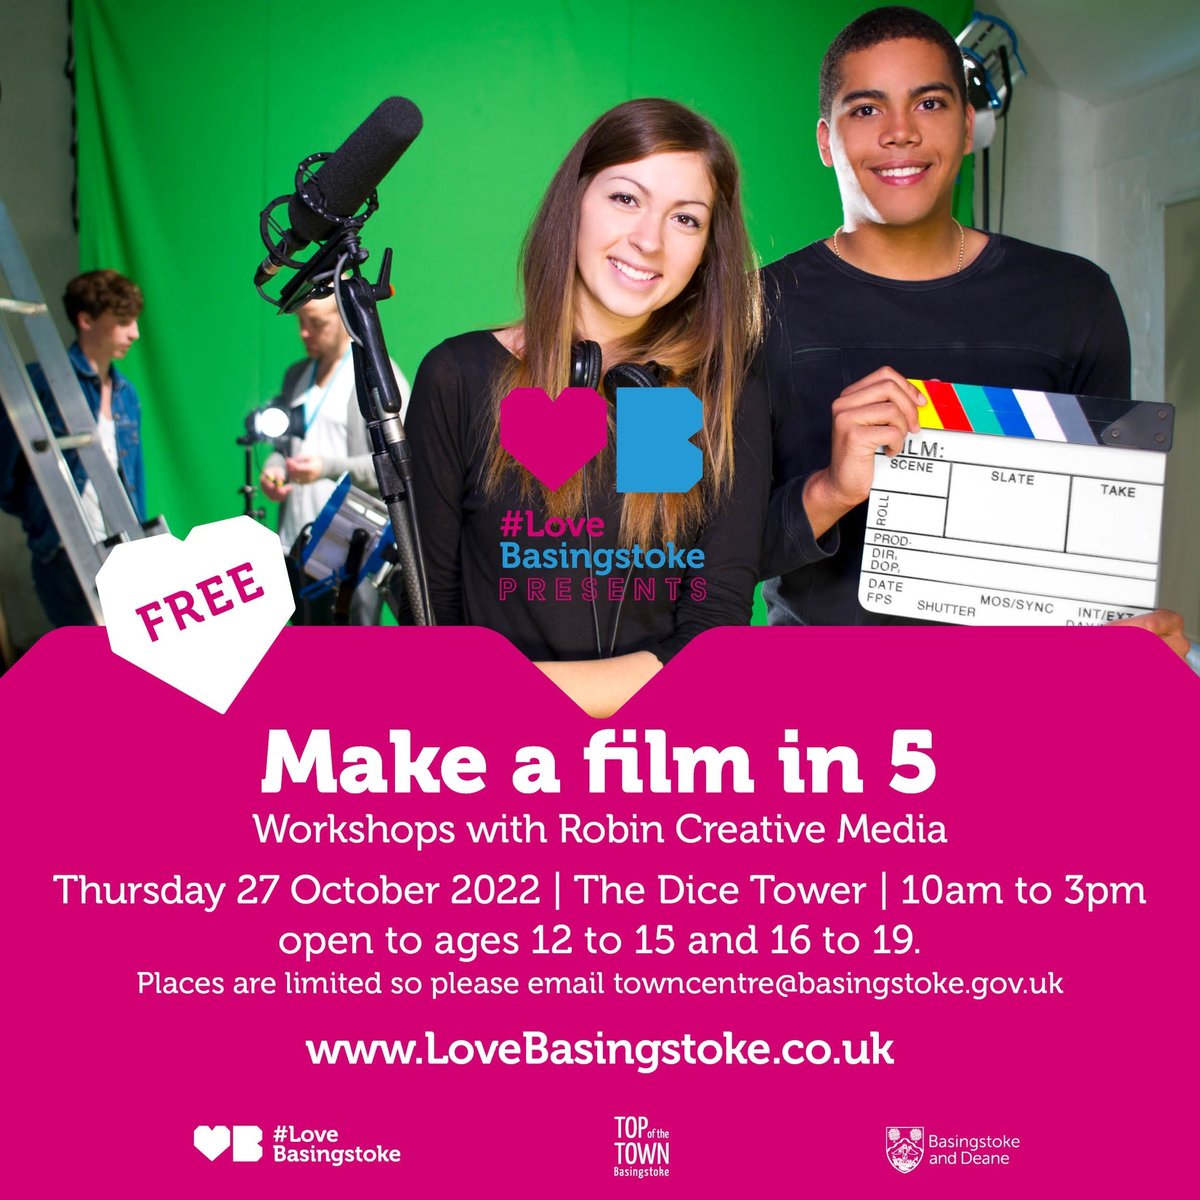 Do you know a young aspiring filmmaker? This half term they can join Robin Media Creative to make a film in 5 hours! 📅 27 October 📍 The Dice Tower, Basingstoke ⏰10am to 3pm 💰 FREE, email towncentre@basingstoke.gov.uk to book ⭐ Two groups - 12-15 years and 16-19 years